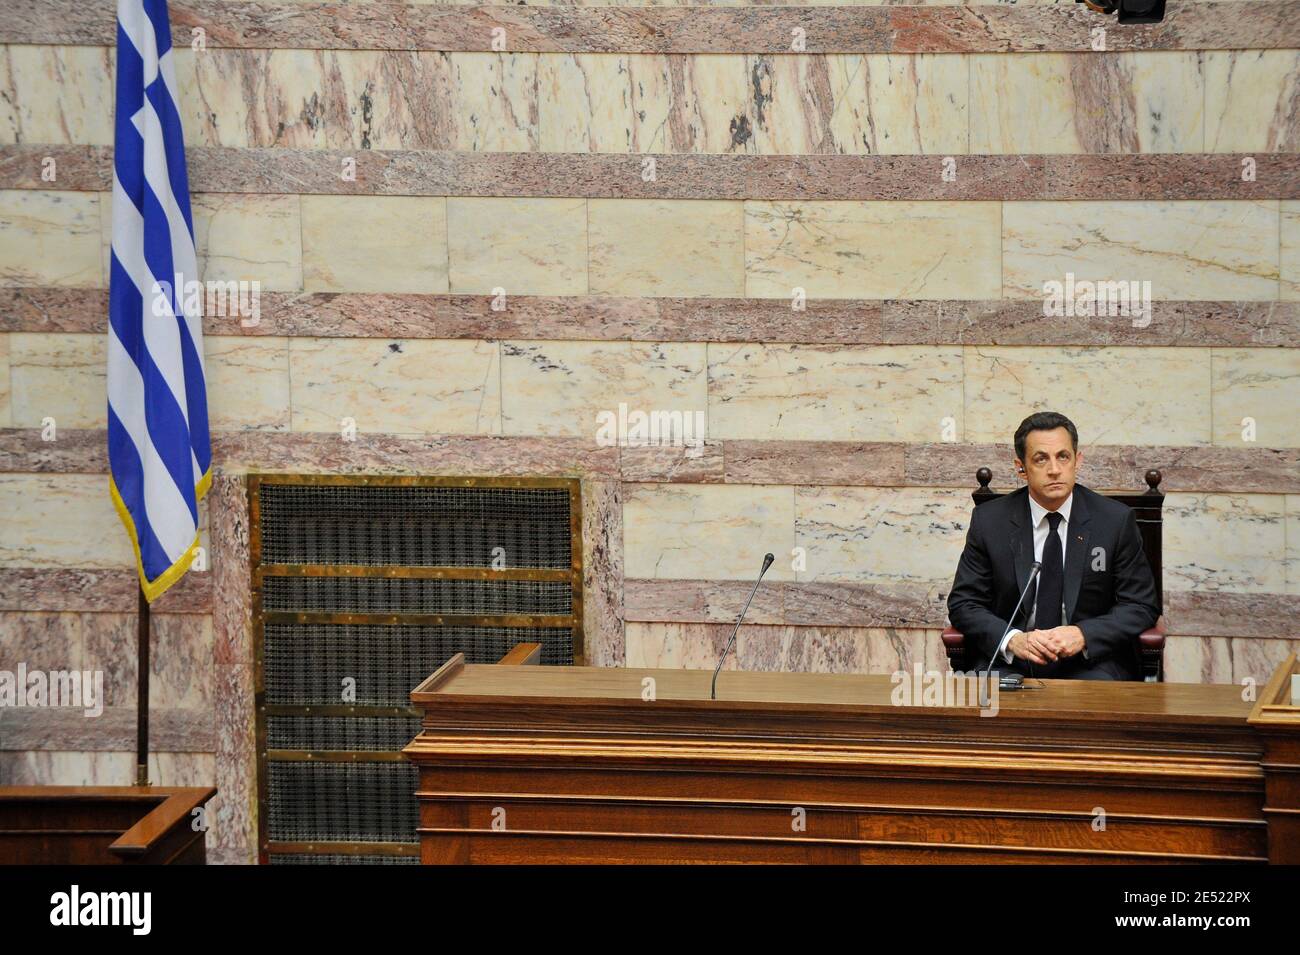 French President Nicolas Sarkozy looks on prior to addressing the Greek parliament in Athens, Greece on June 6, 2008. Sarkozy arrived in Greece Friday for an official visit, the first by a French head of state in more than 25 years. Sarkozy was addressing the Greek parliament in a ceremony only accorded to three foreign presidents in the past: his predecessor Charles de Gaulle and US presidents Dwight Eisenhower and George Bush Sr. Photo by Mousse/ABACAPRESS.COM Stock Photo